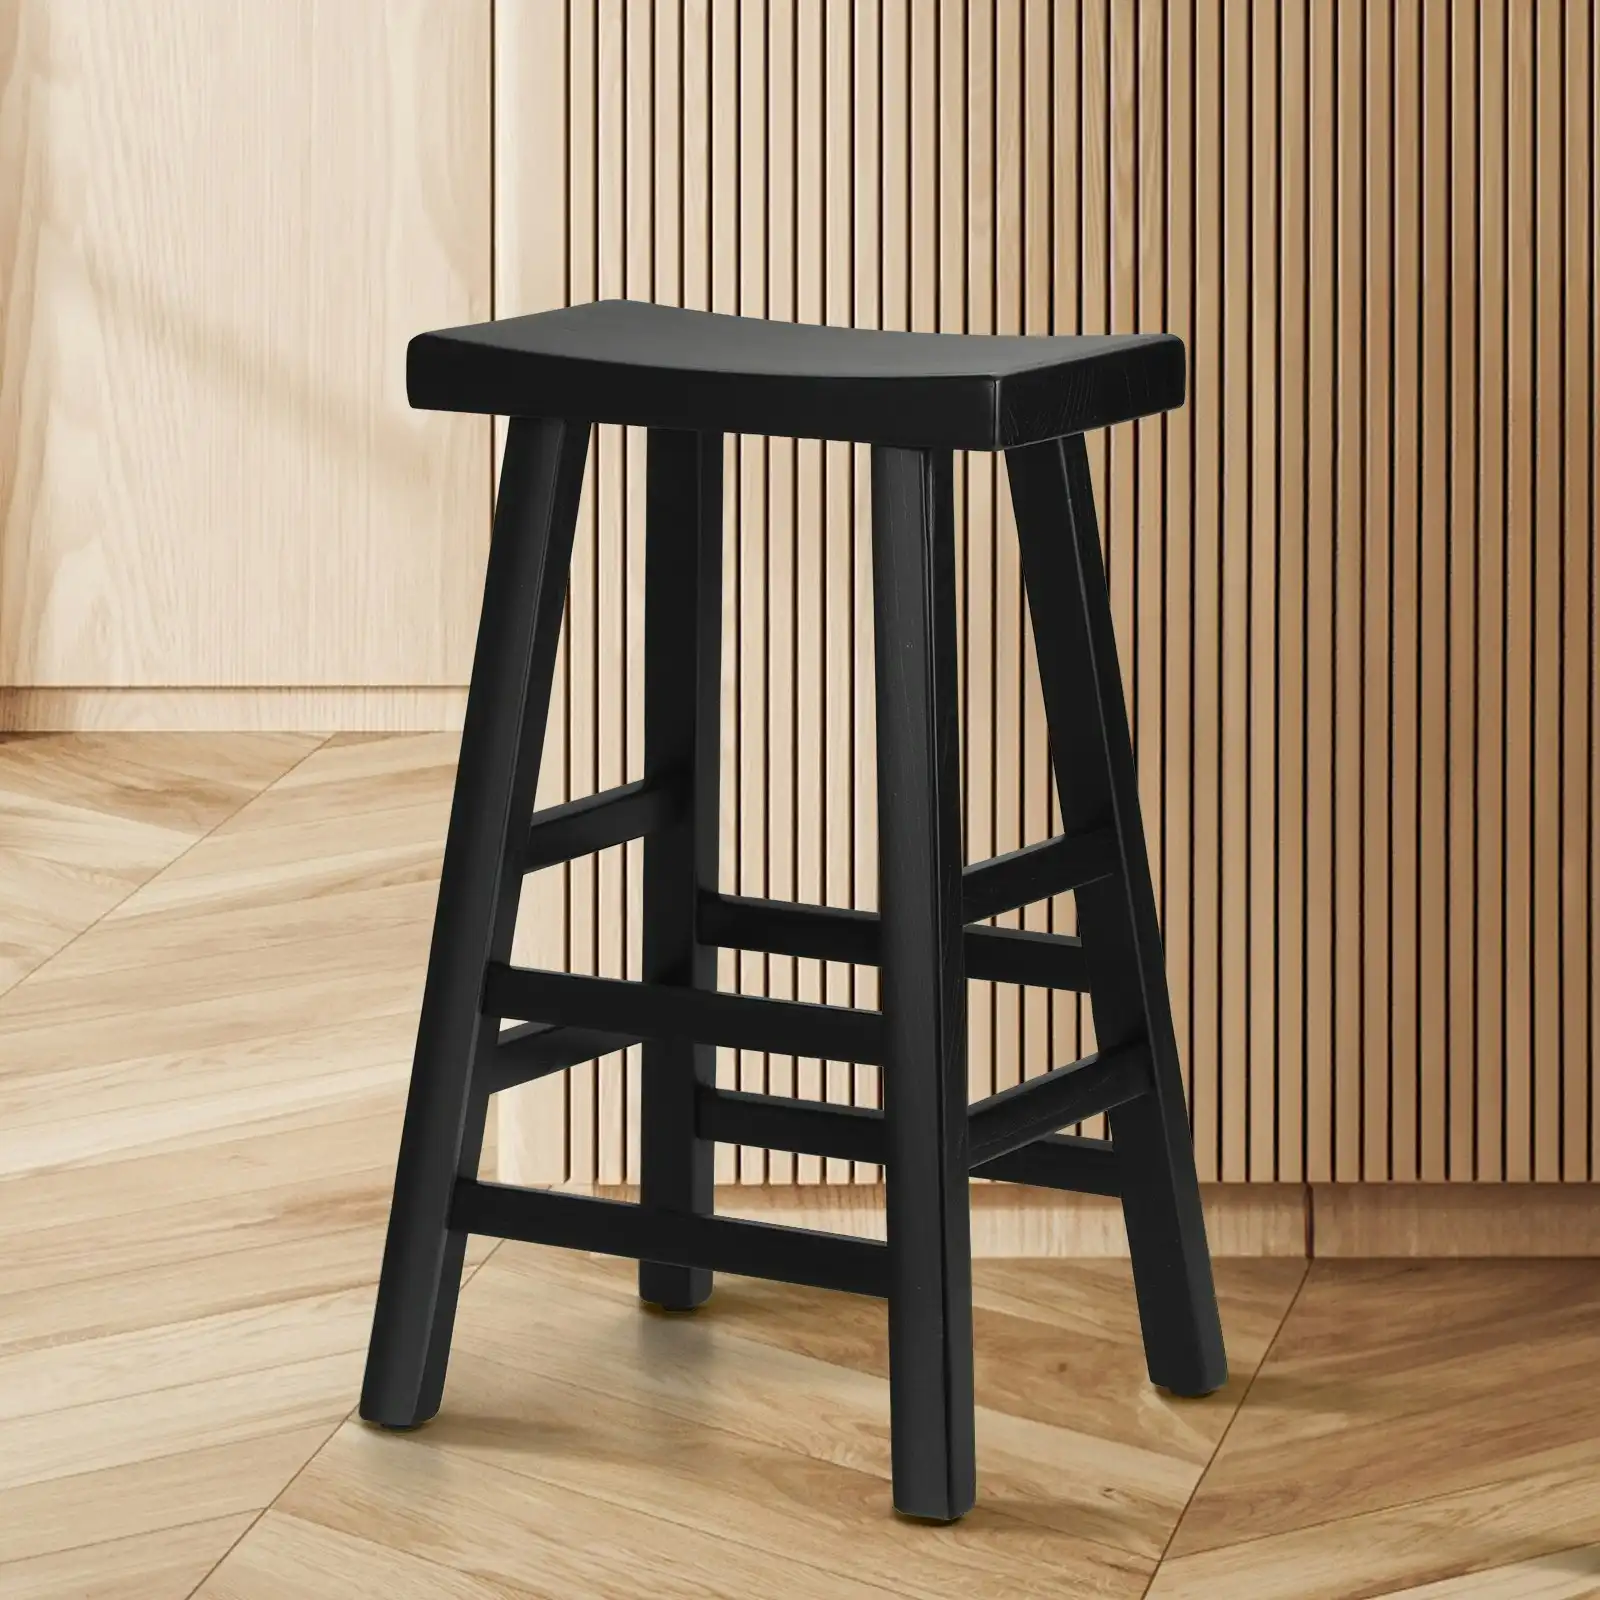 Oikiture Bar Stools Kitchen Stool Wooden Counter Chairs Barstools Black